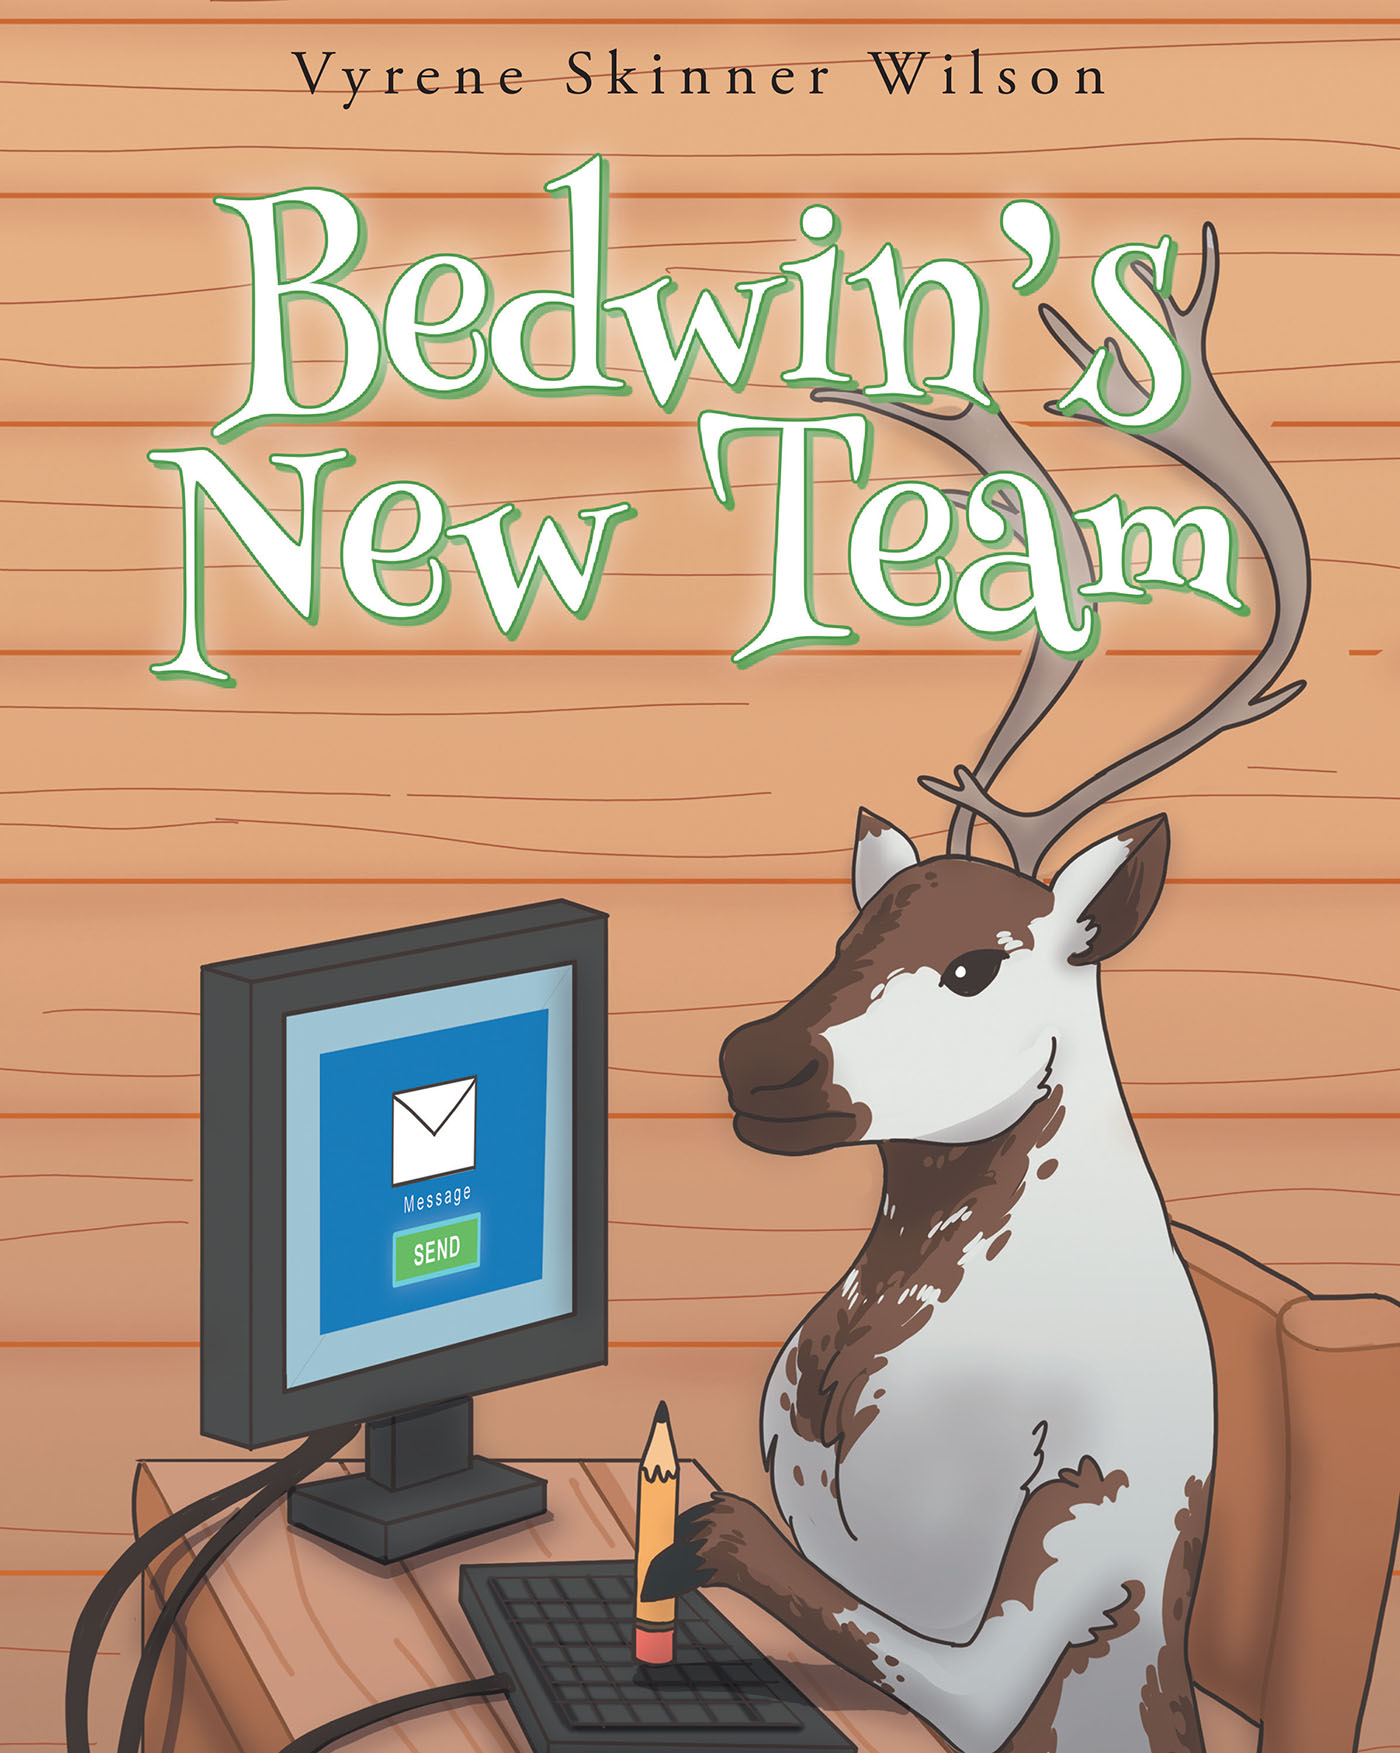 Vyrene Skinner Wilson’s New Book, "Bedwin's New Team," is an Adorable Tale That Follows Santa as He Attempts to Build a New Team of Flying Reindeer in Time for Christmas